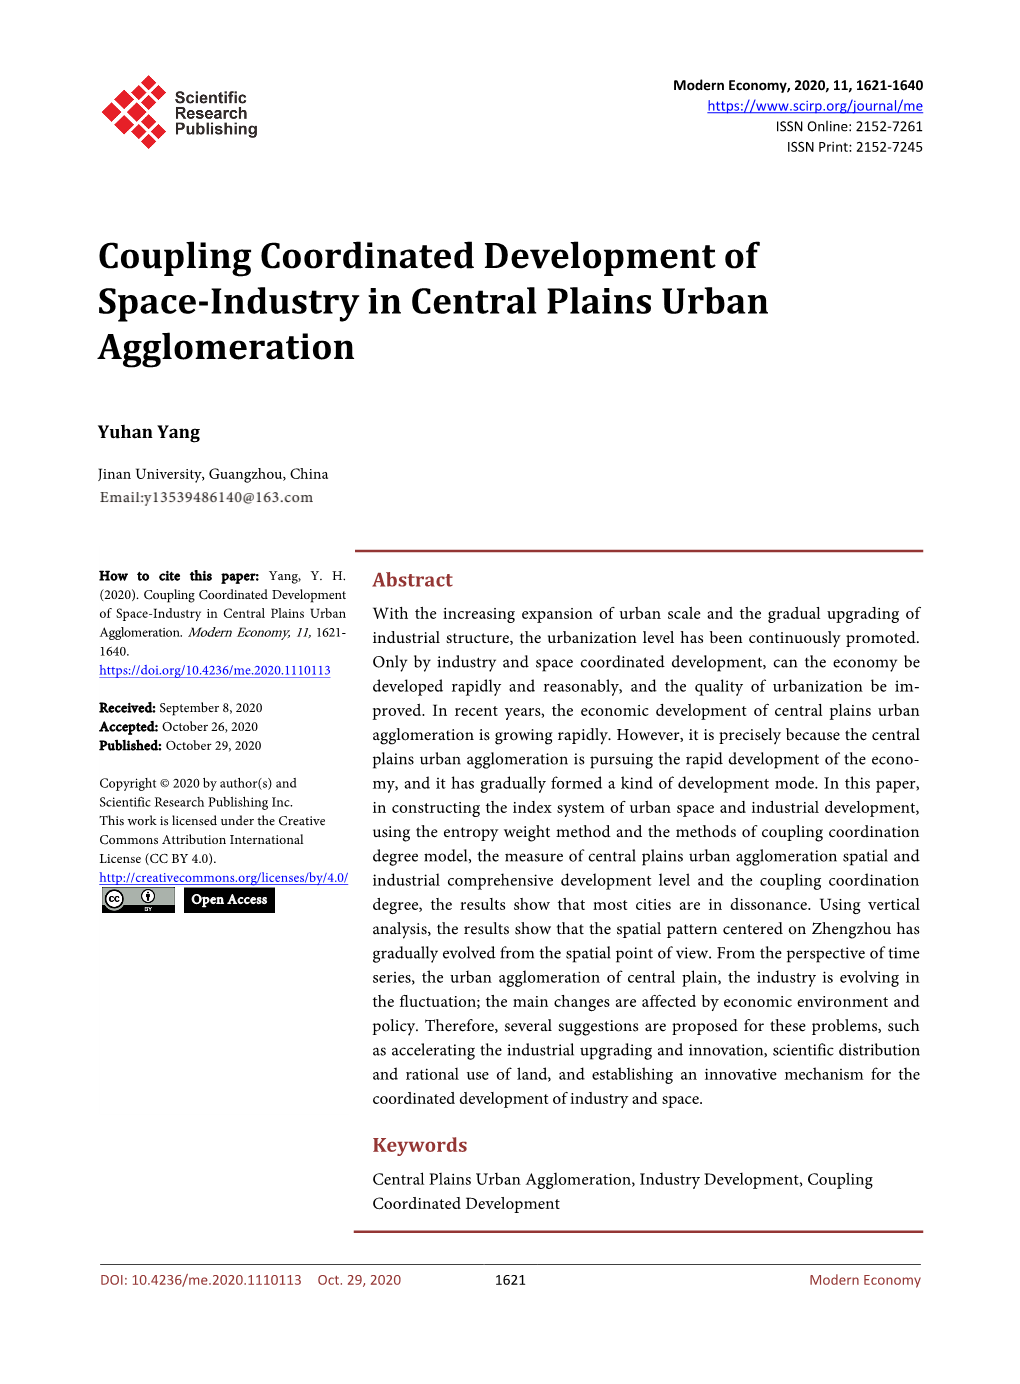 Coupling Coordinated Development of Space-Industry in Central Plains Urban Agglomeration